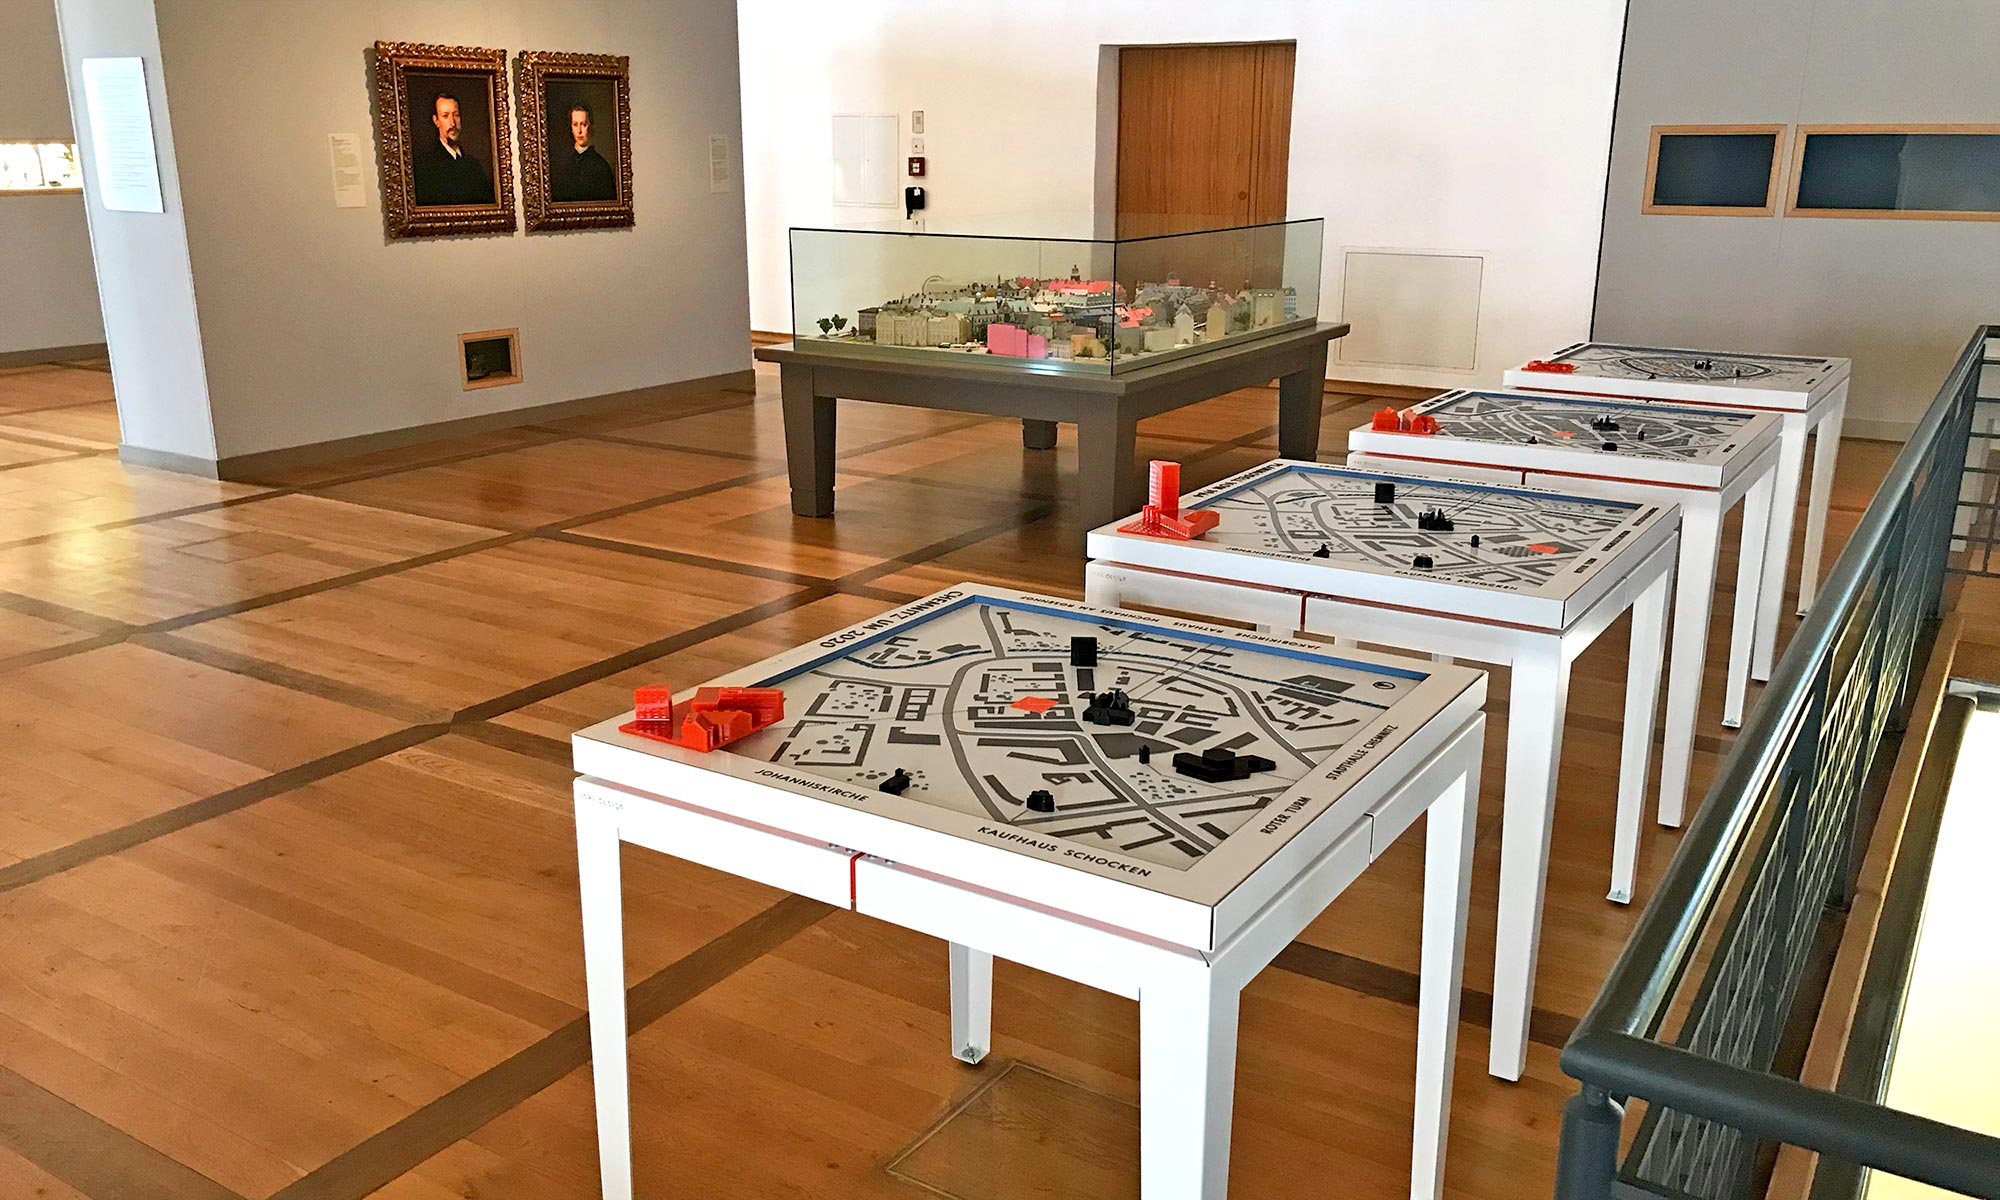 An exhibition room of the Schlossberg Museum in which an older city model is displayed in a large glass case. Next to this model under glass are the four tactile models by inkl.Design, which invite you to touch them.